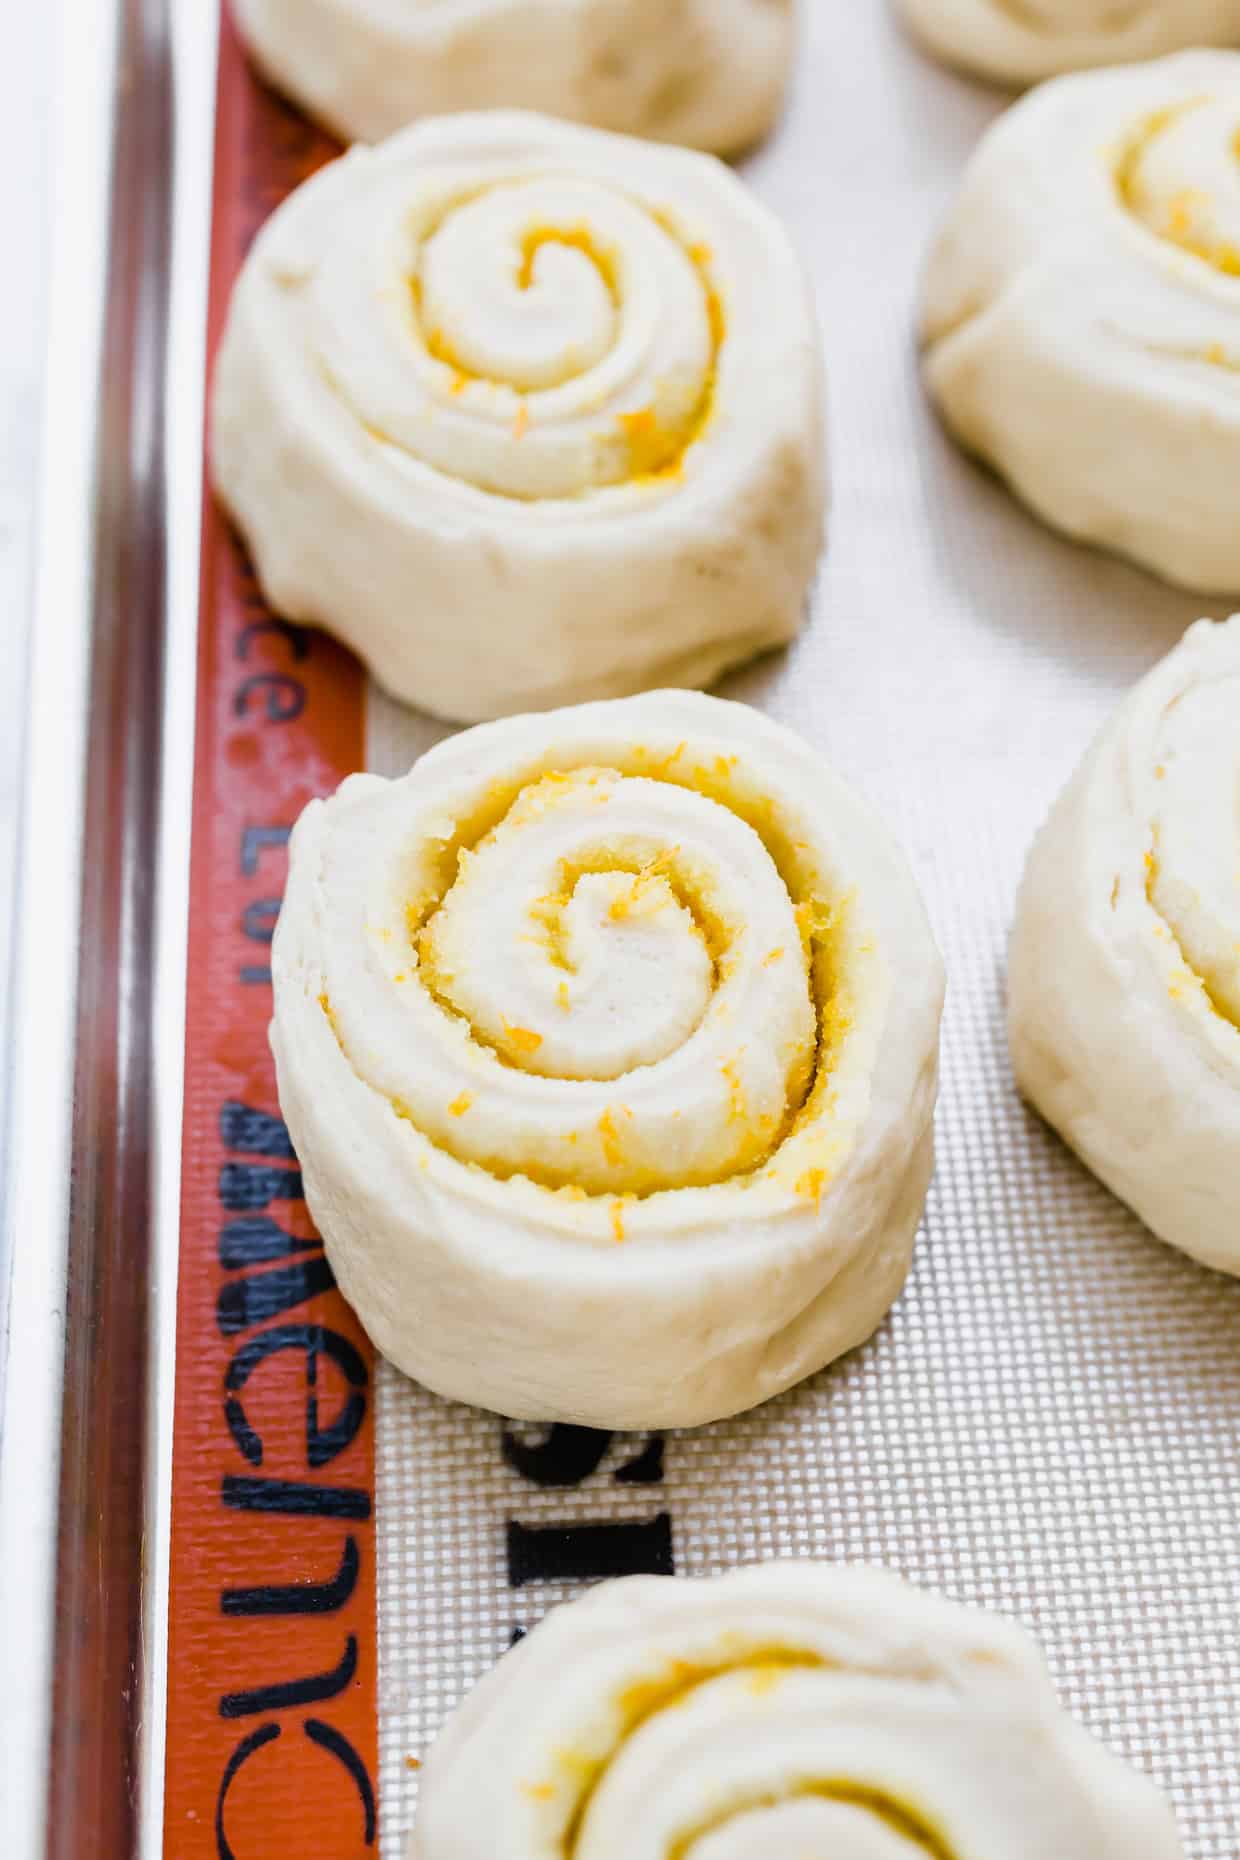 Easy homemade orange sweet rolls rolled into spirals and place on a baking sheet.